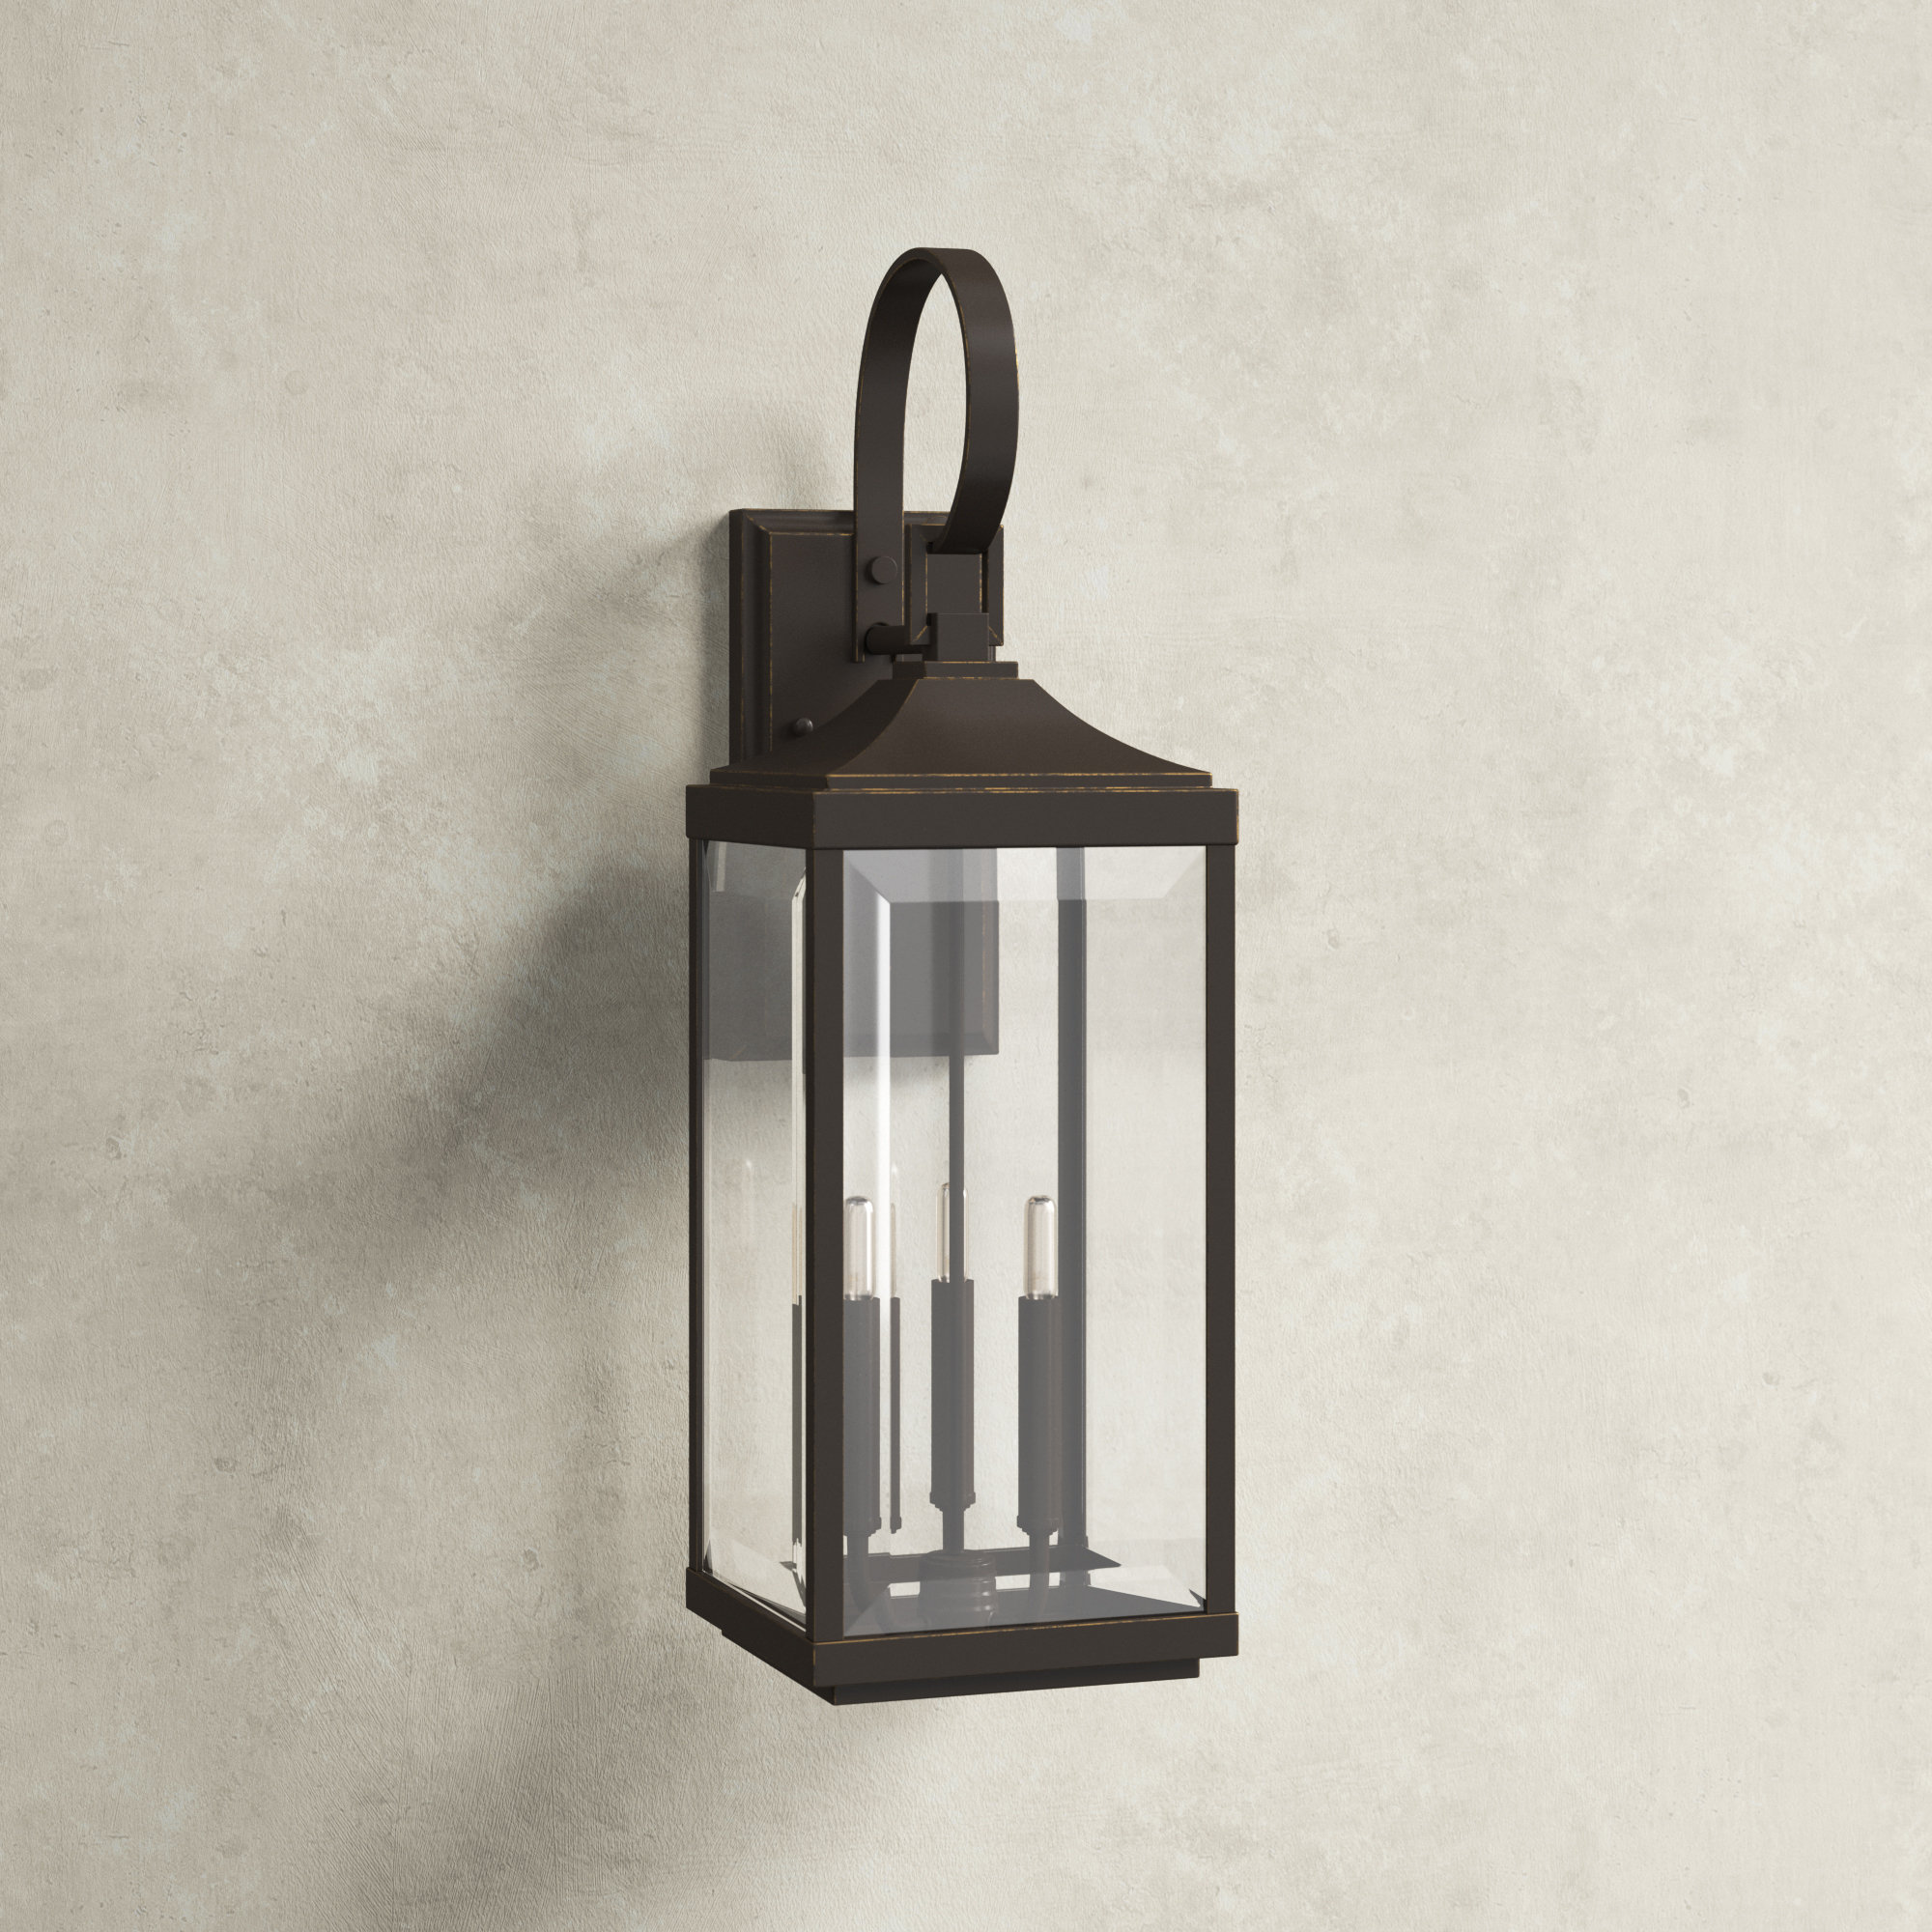 Pack of 2 Outdoor Wall Lantern Sconce With 6-Panel Clear Glass Design